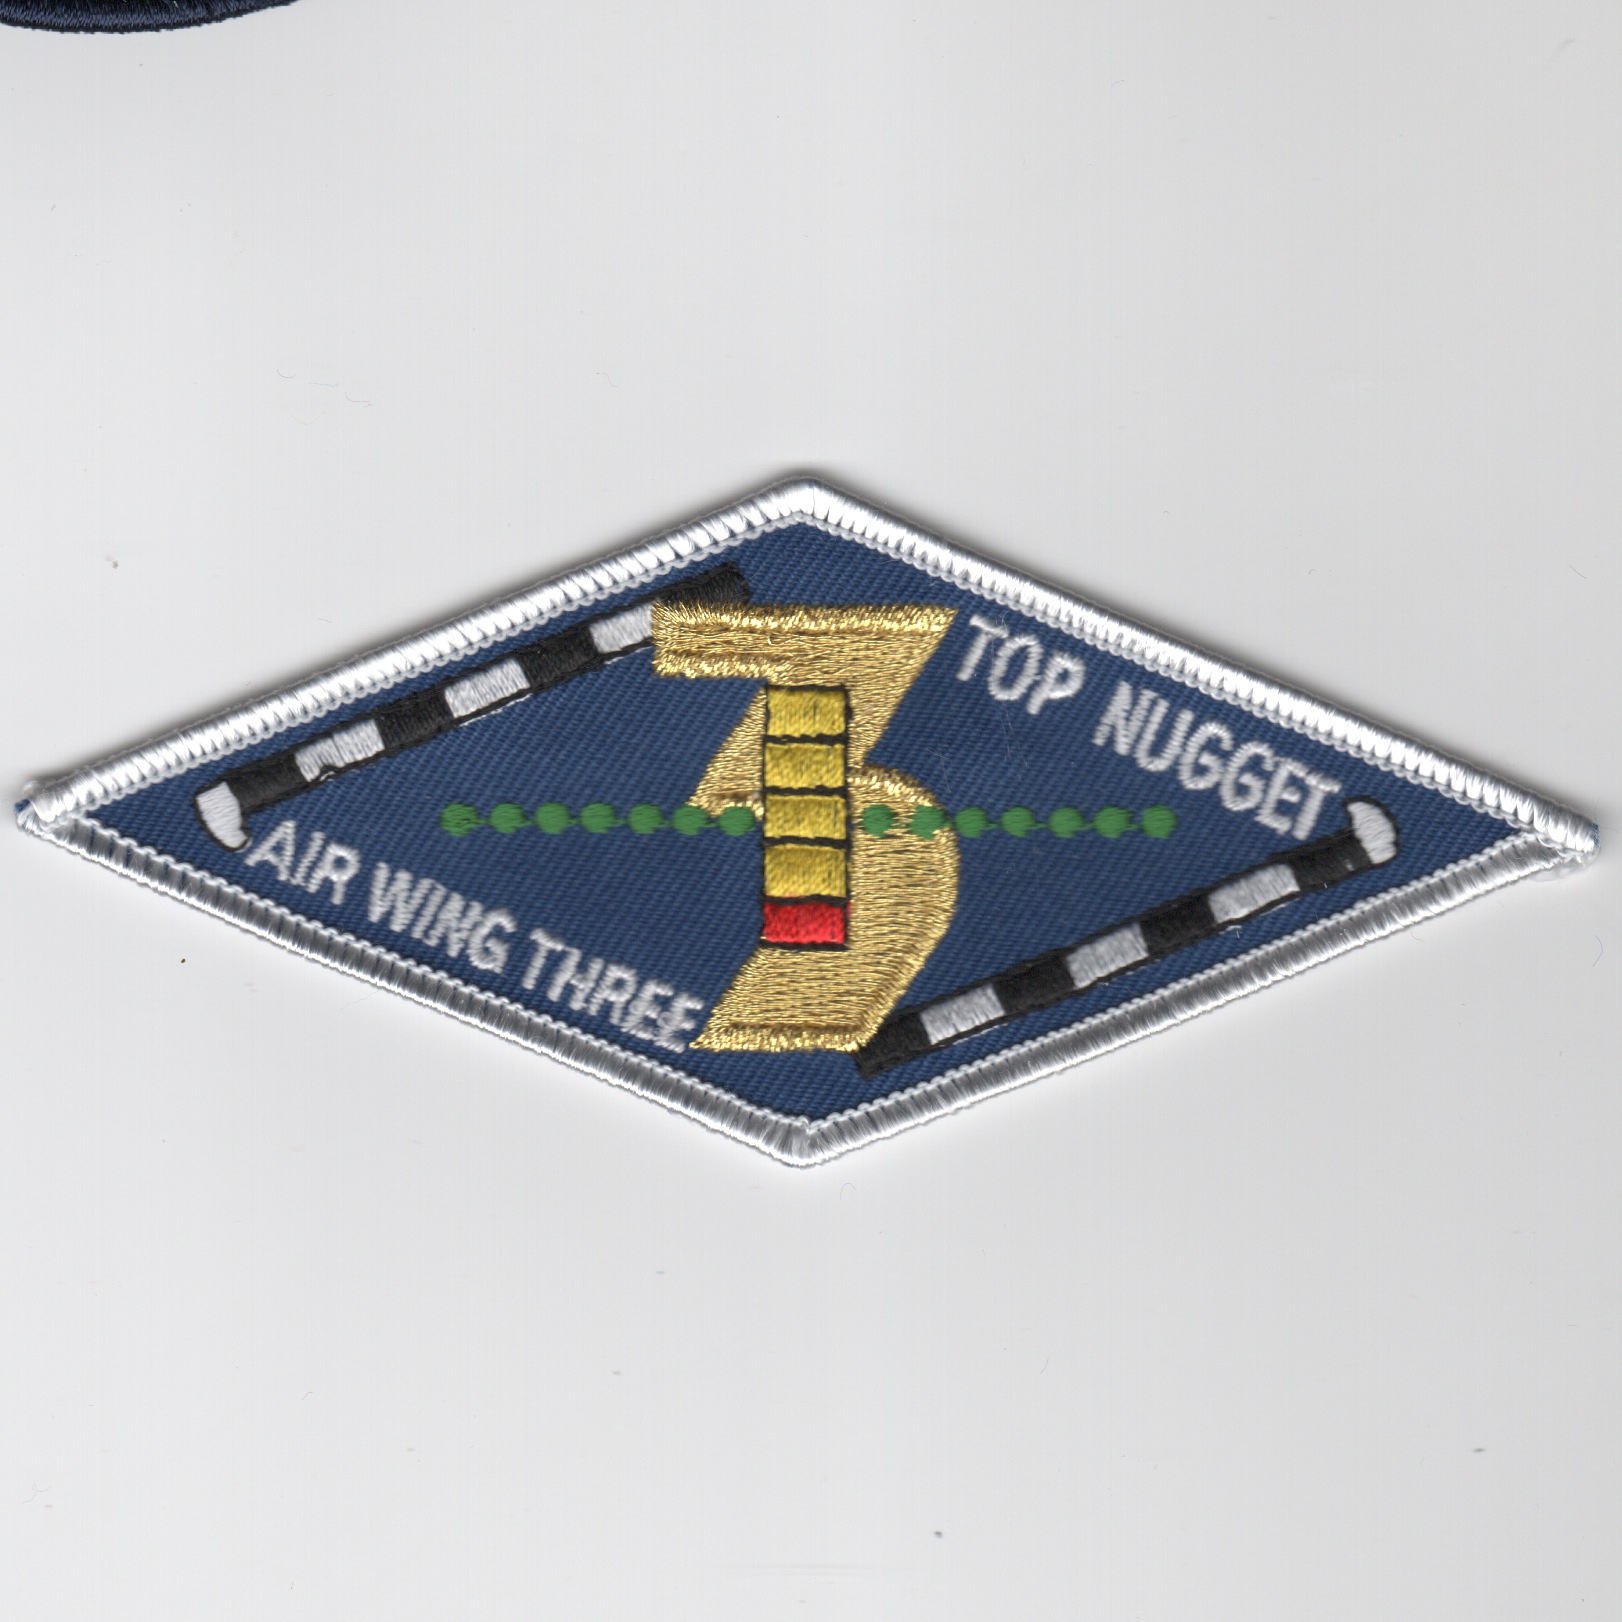 CVW-3 'Top NUGGET' Patch